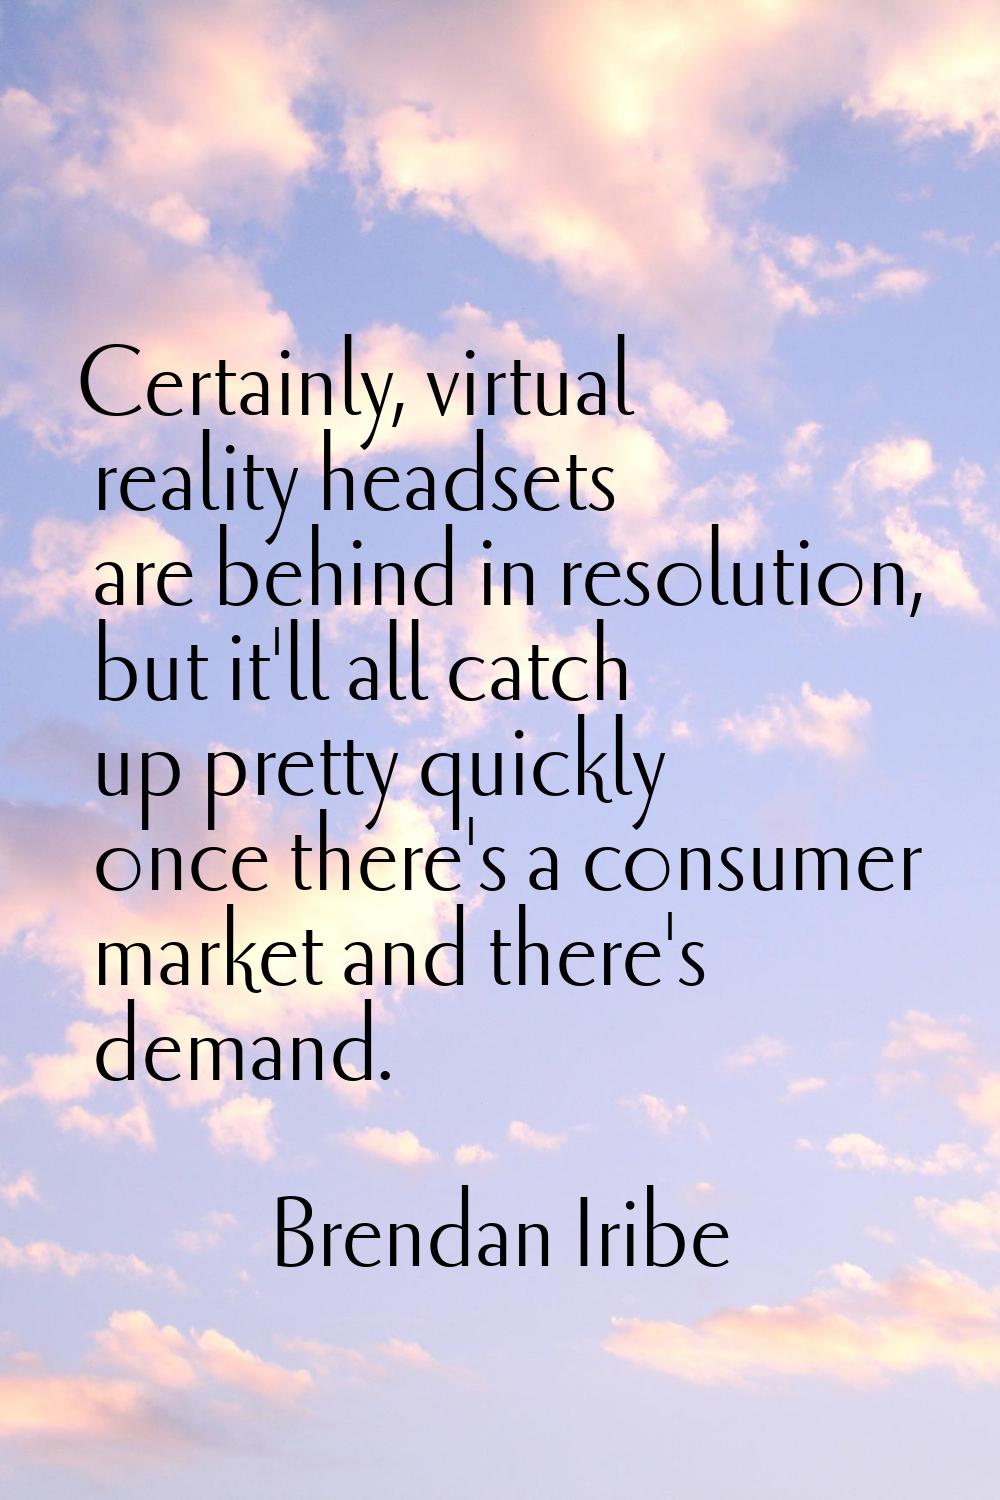 Certainly, virtual reality headsets are behind in resolution, but it'll all catch up pretty quickly